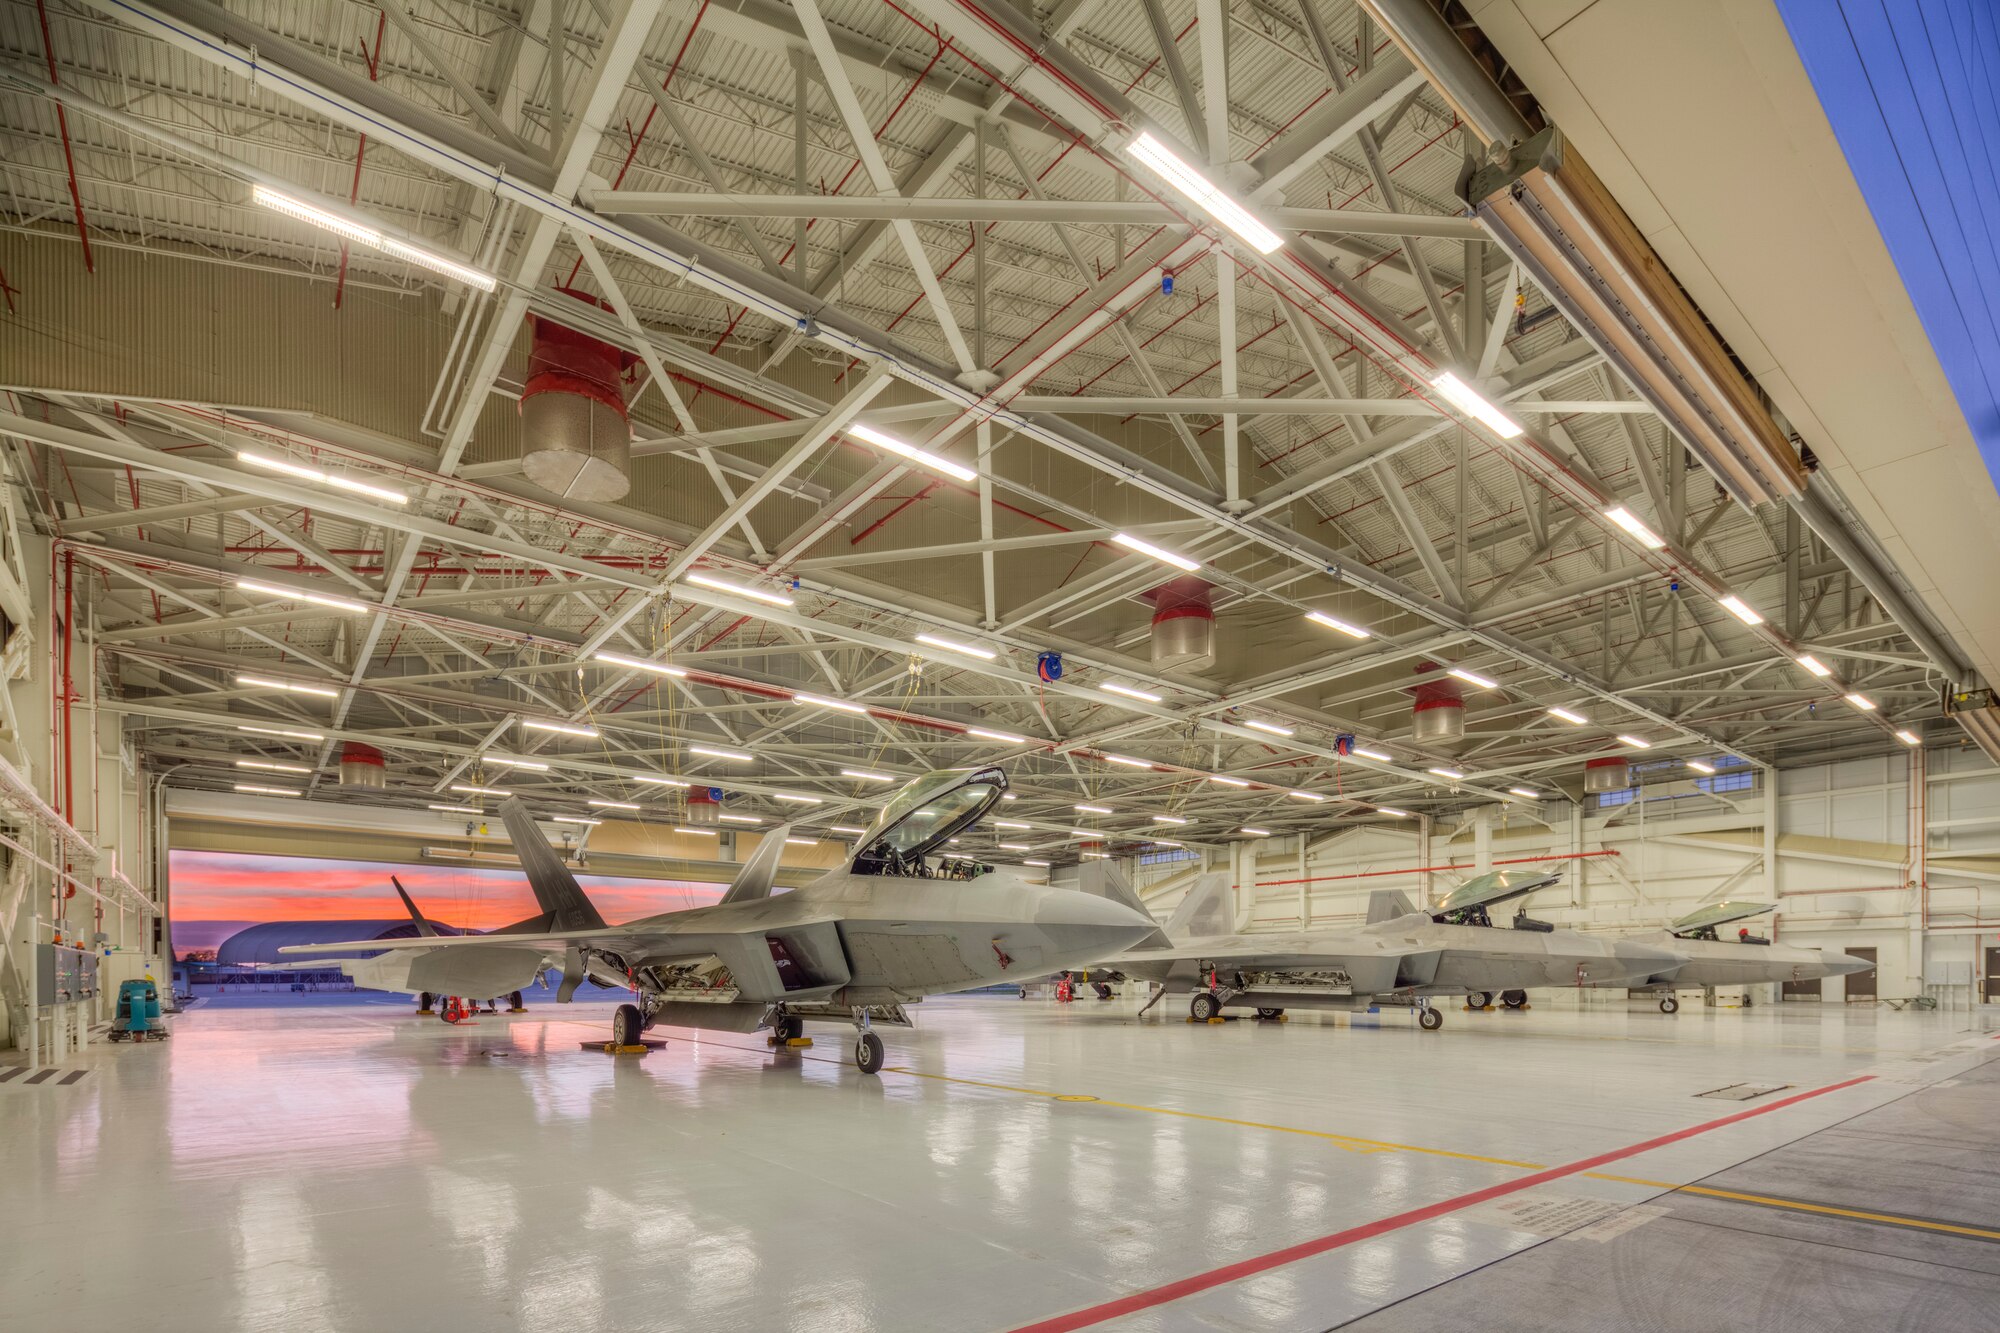 An F-22 hangar, squadron operations and aircraft maintenance unit at Joint Base Pearl Harbor-Hickam, Hawaii, shared top honors for facility design in the 2014 Air Force Design Awards. In addition to aesthetic qualities, the annual awards program considers energy efficiency, functionality and sustainability when singling out the Air Force’s best design projects. (Courtesy photo)